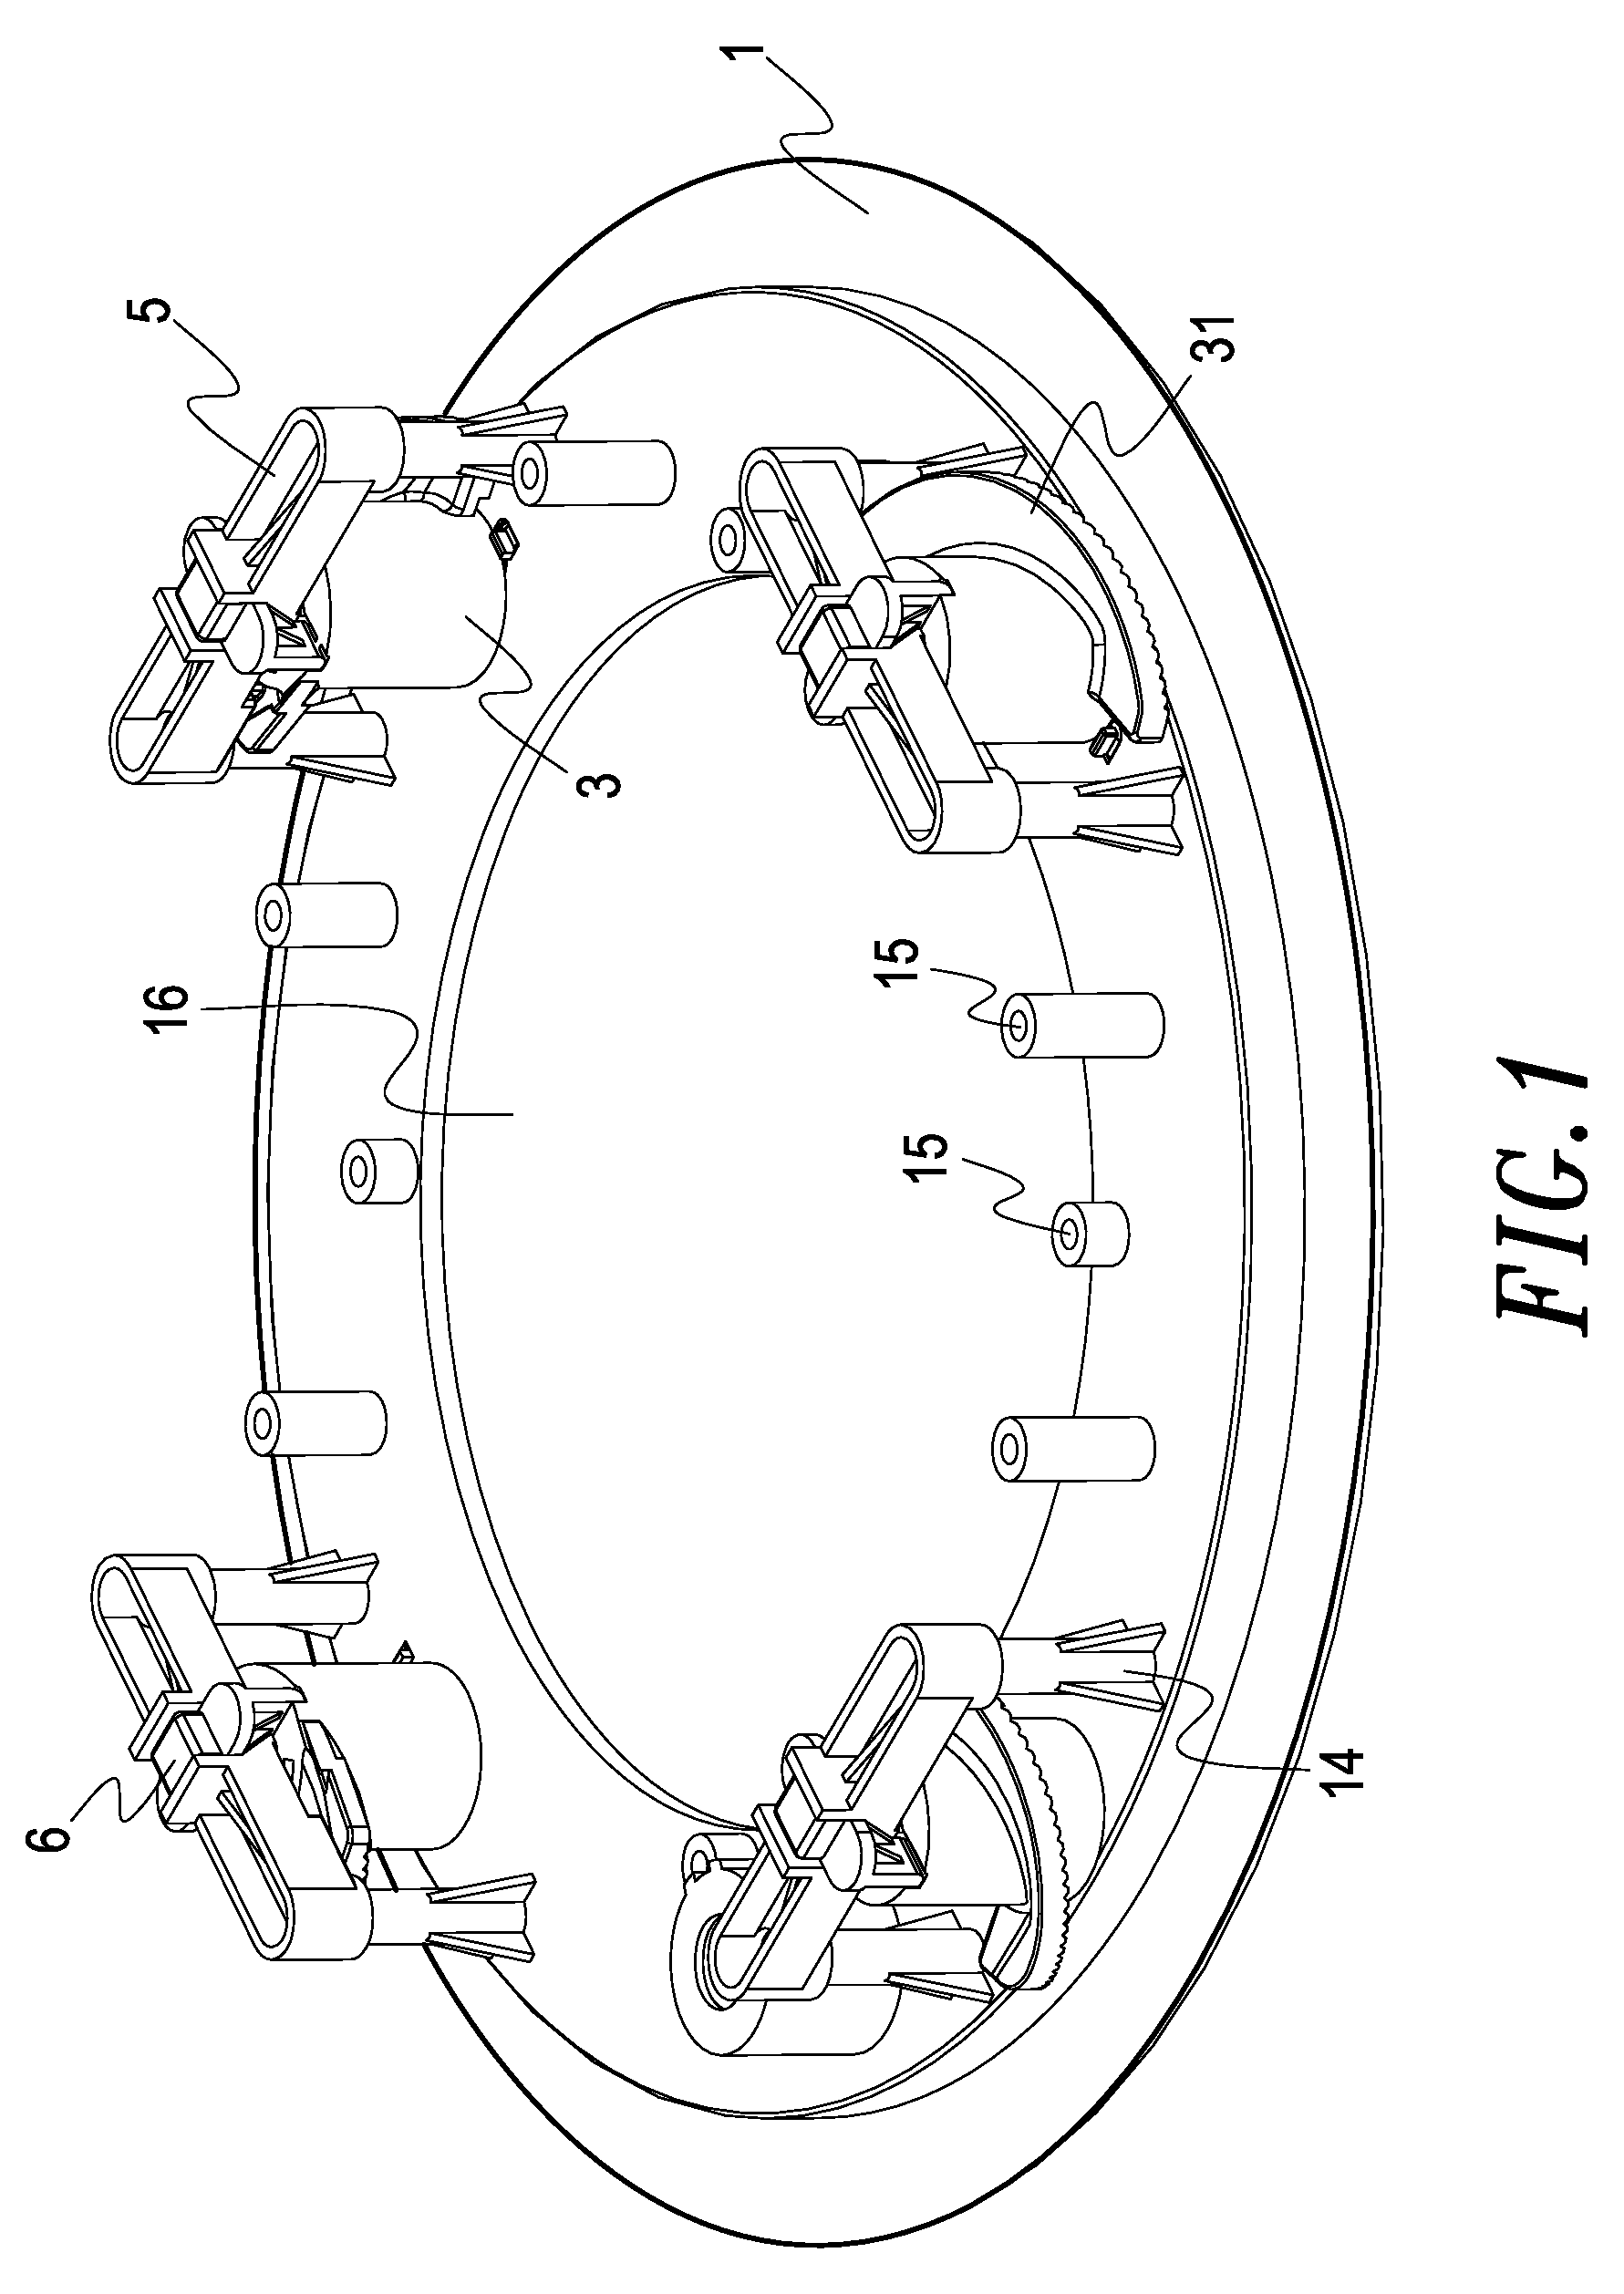 Rapid installation and detachment device for flush mounting speaker on ceiling or wall